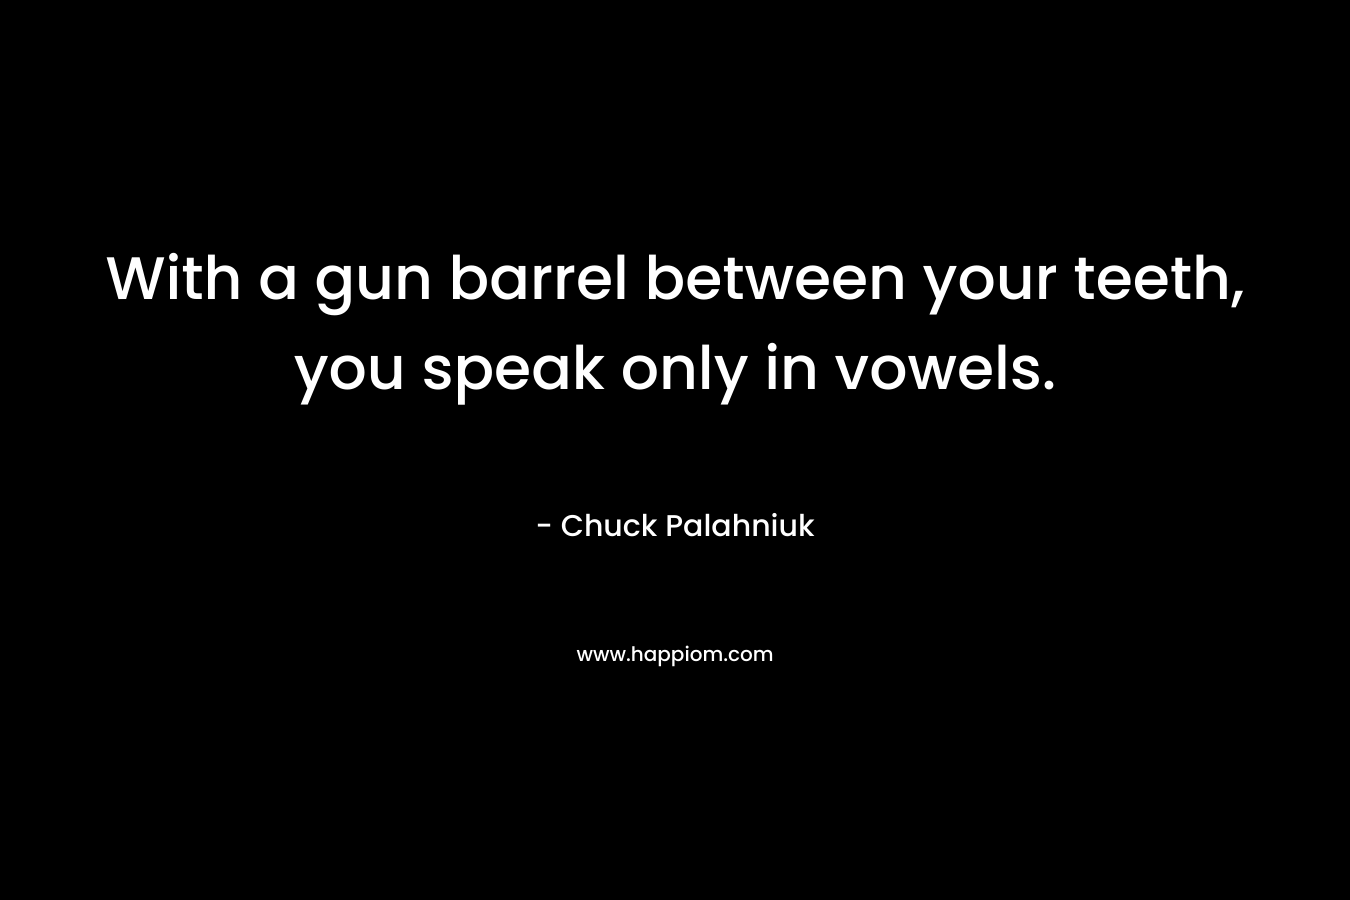 With a gun barrel between your teeth, you speak only in vowels. – Chuck Palahniuk